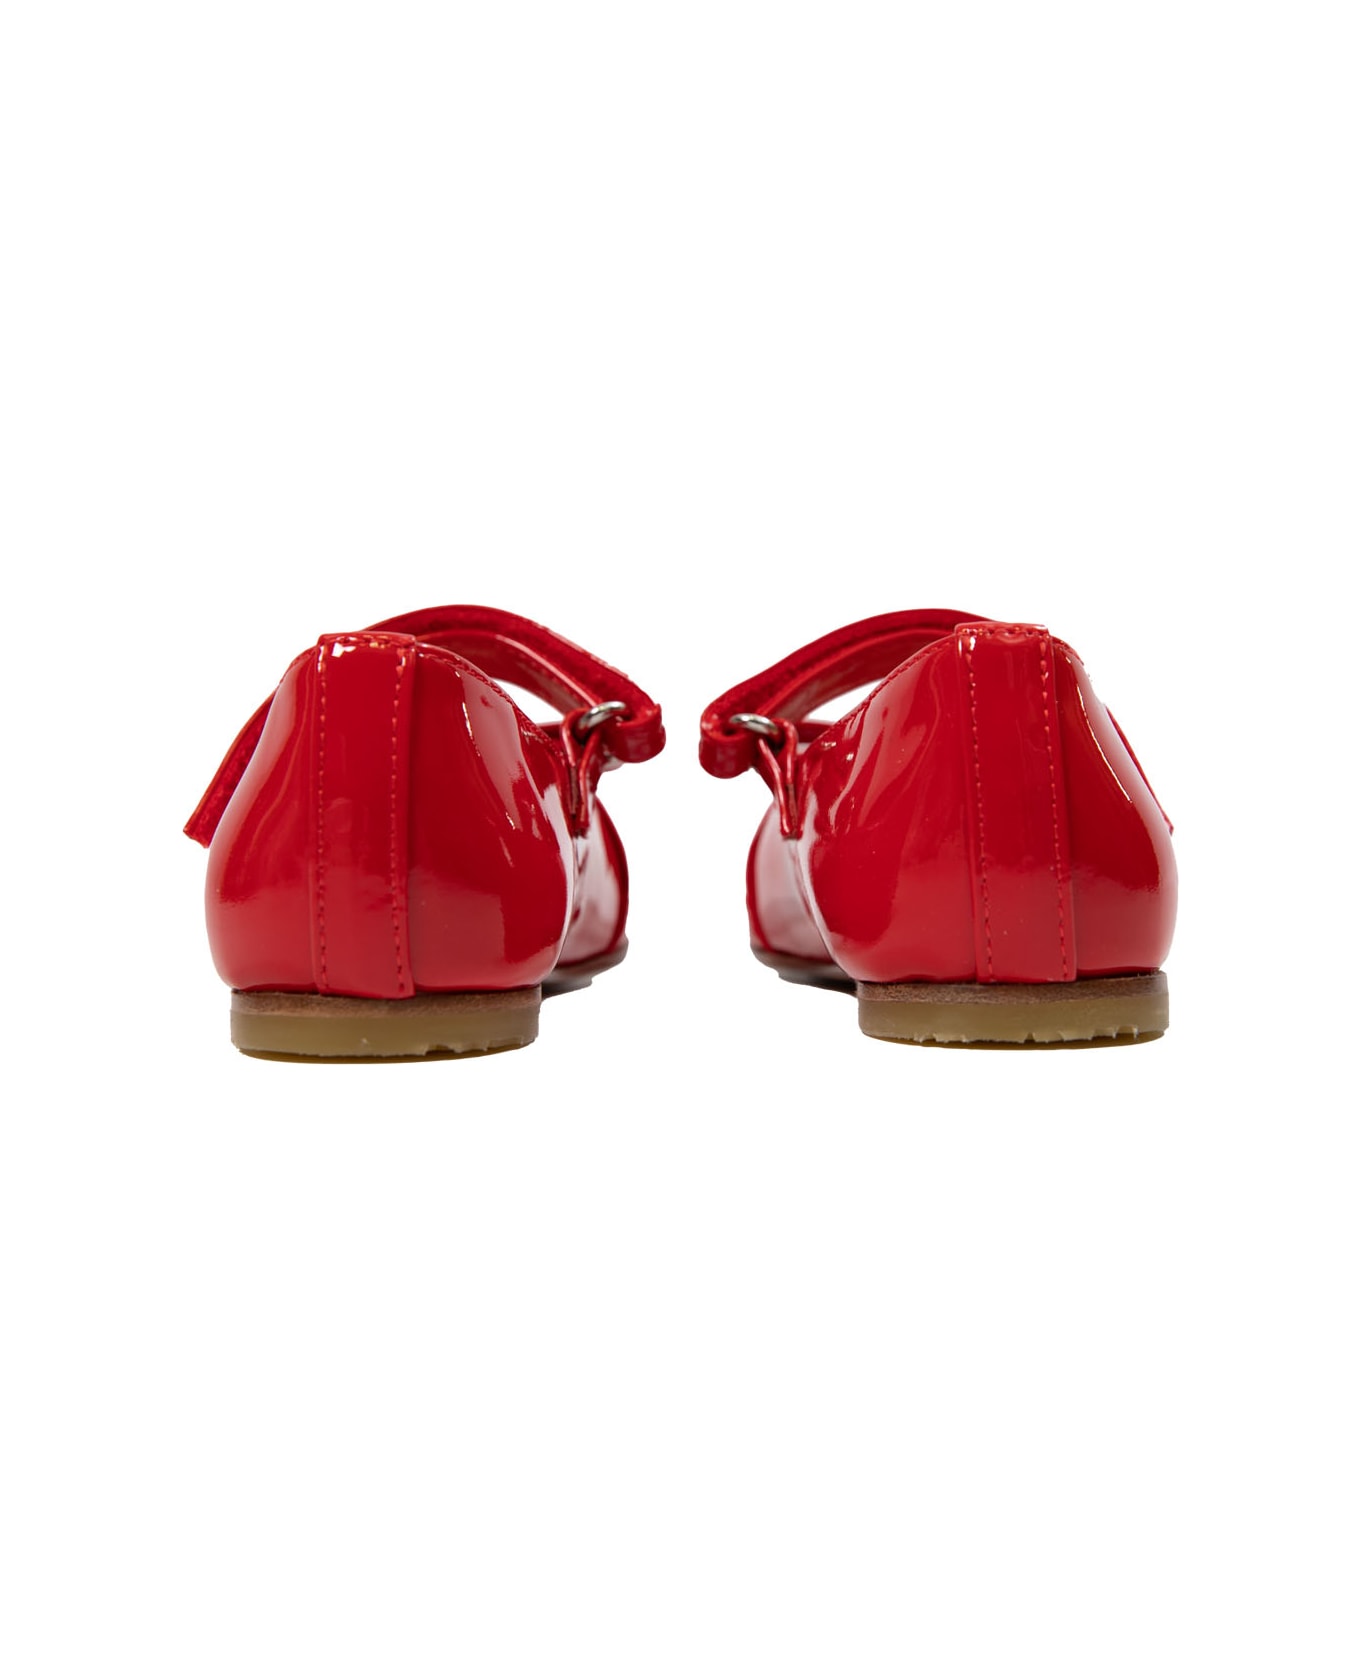 Andrea Montelpare Patent Leather Shoes - Red